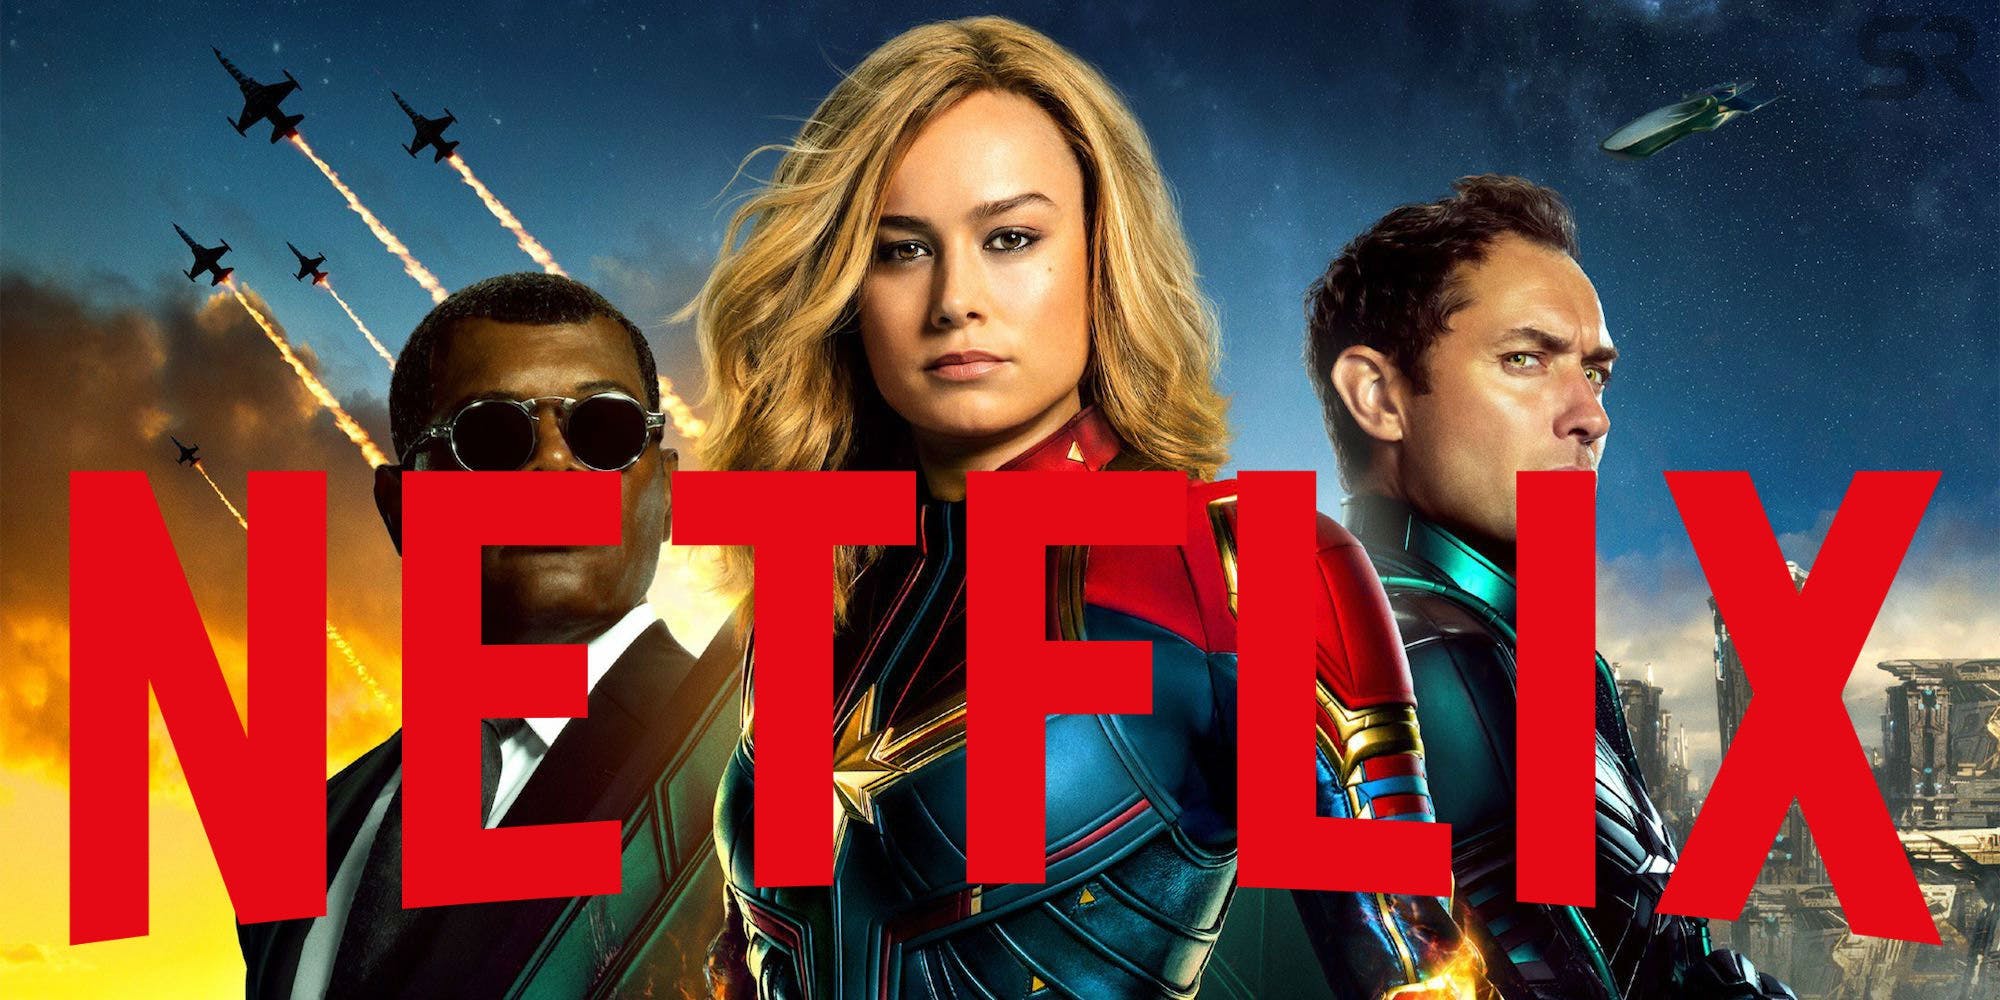 Will Captain Marvel come on Netflix?